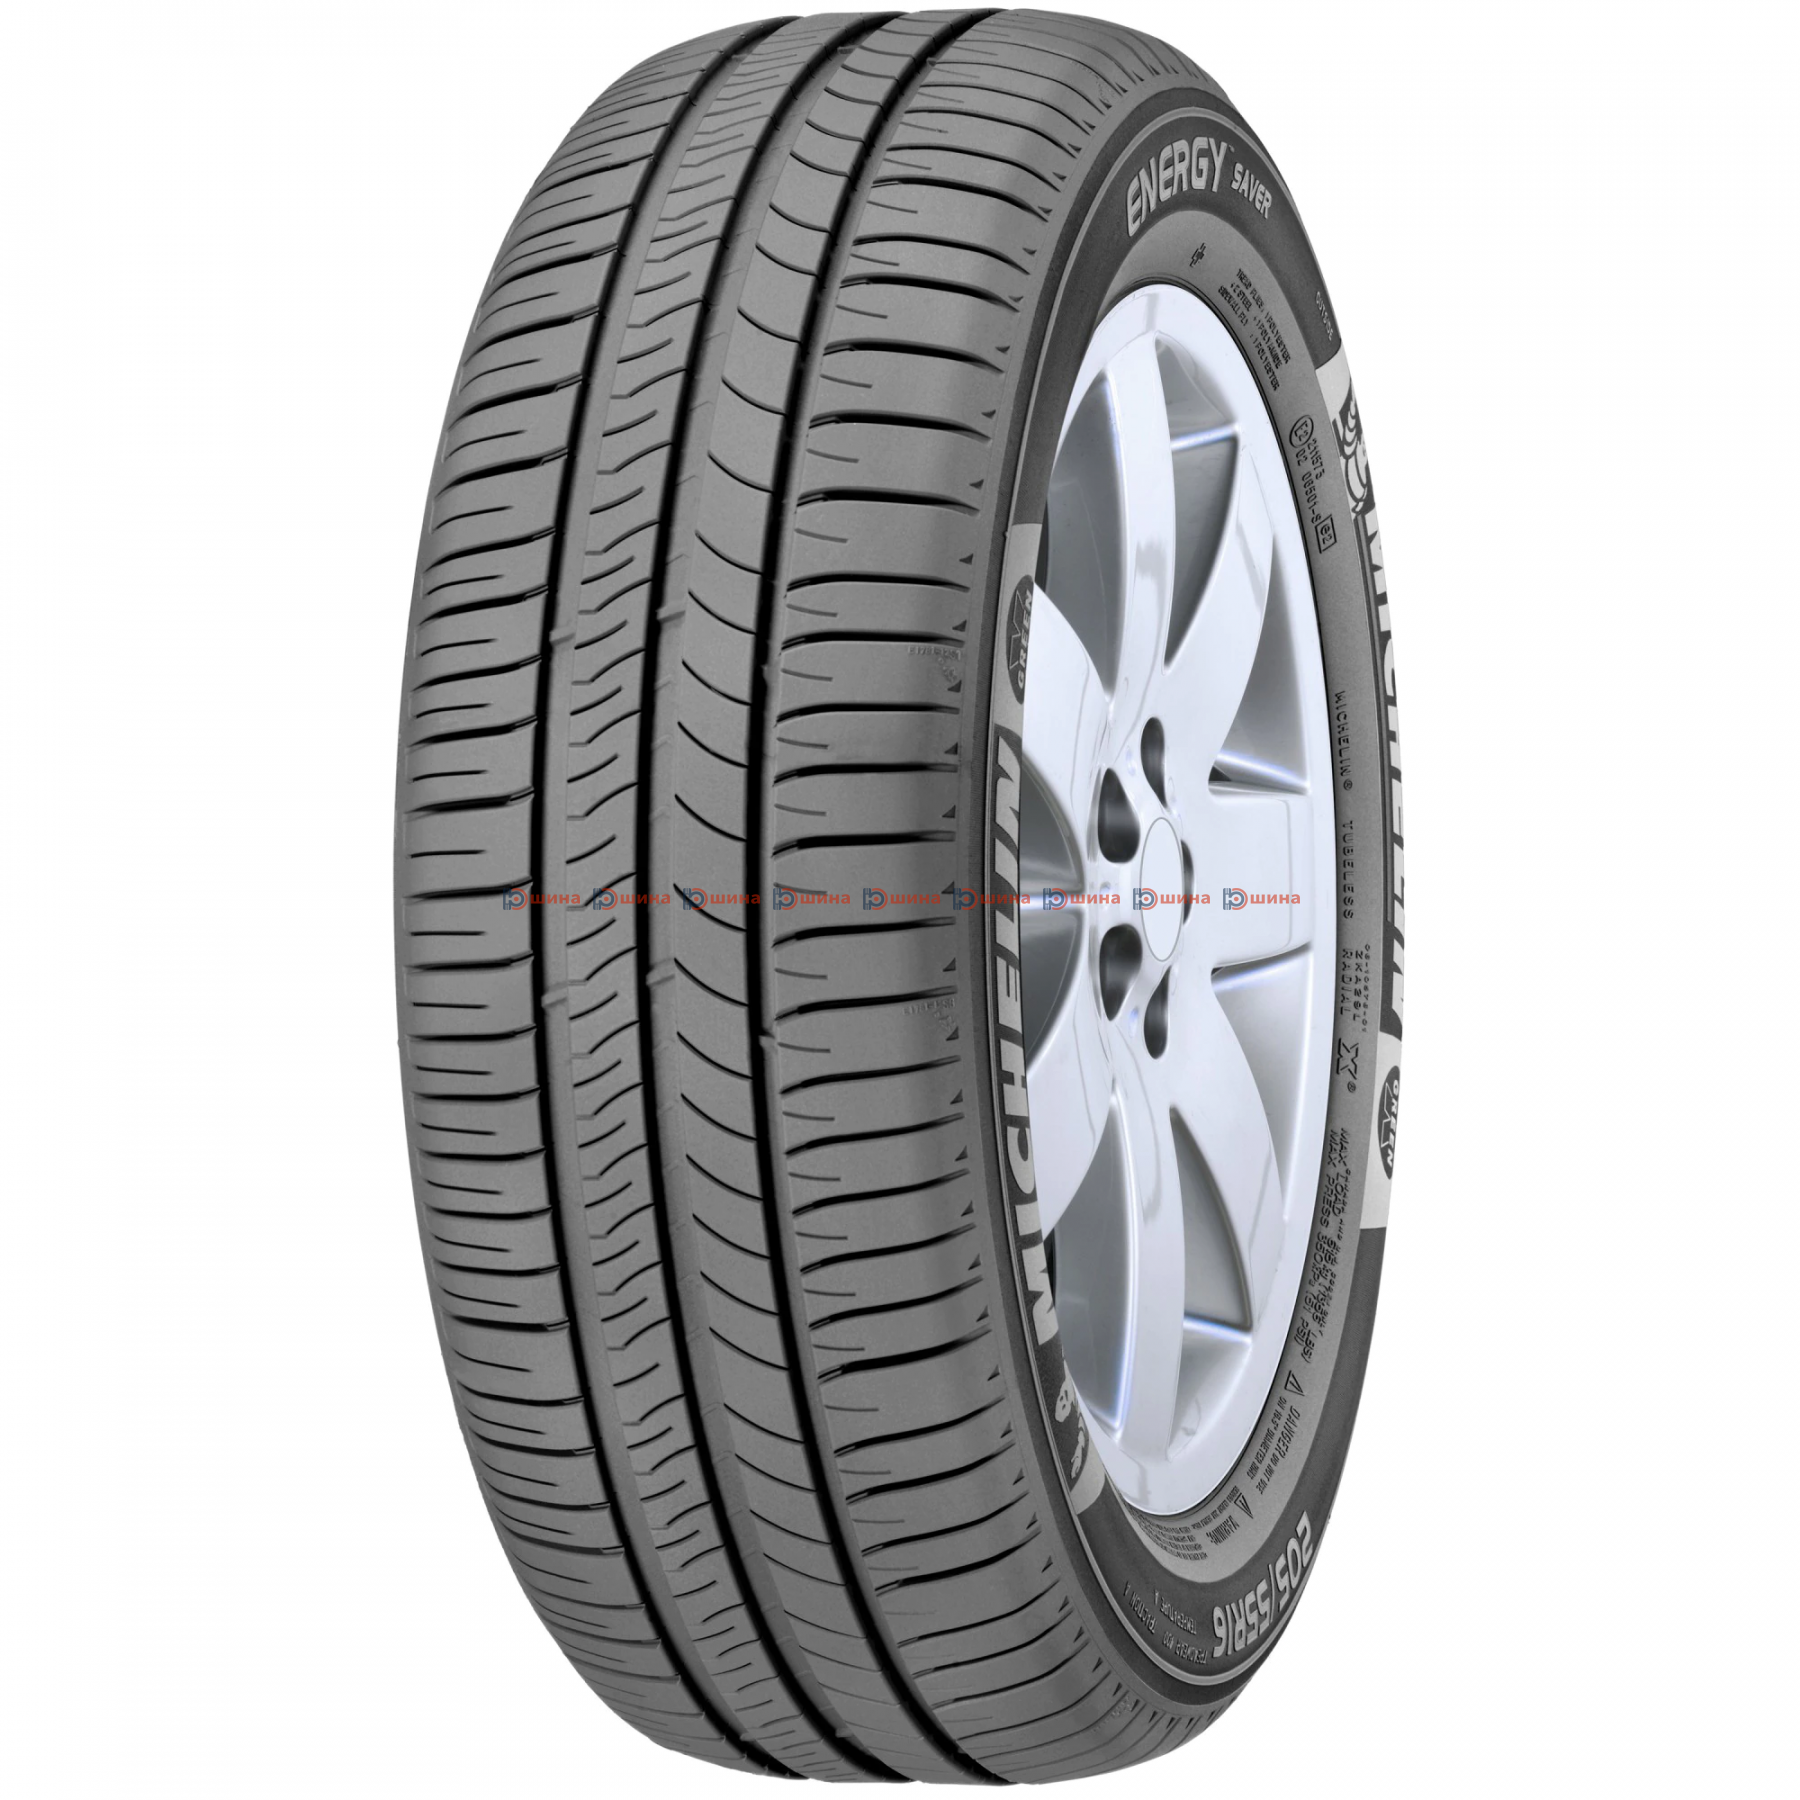 Купить шины мишлен 15. Maxxis ma-z4s Victra. Toyo PROXES St. Шины Toyo PROXES St. Toyo observe g3-Ice.